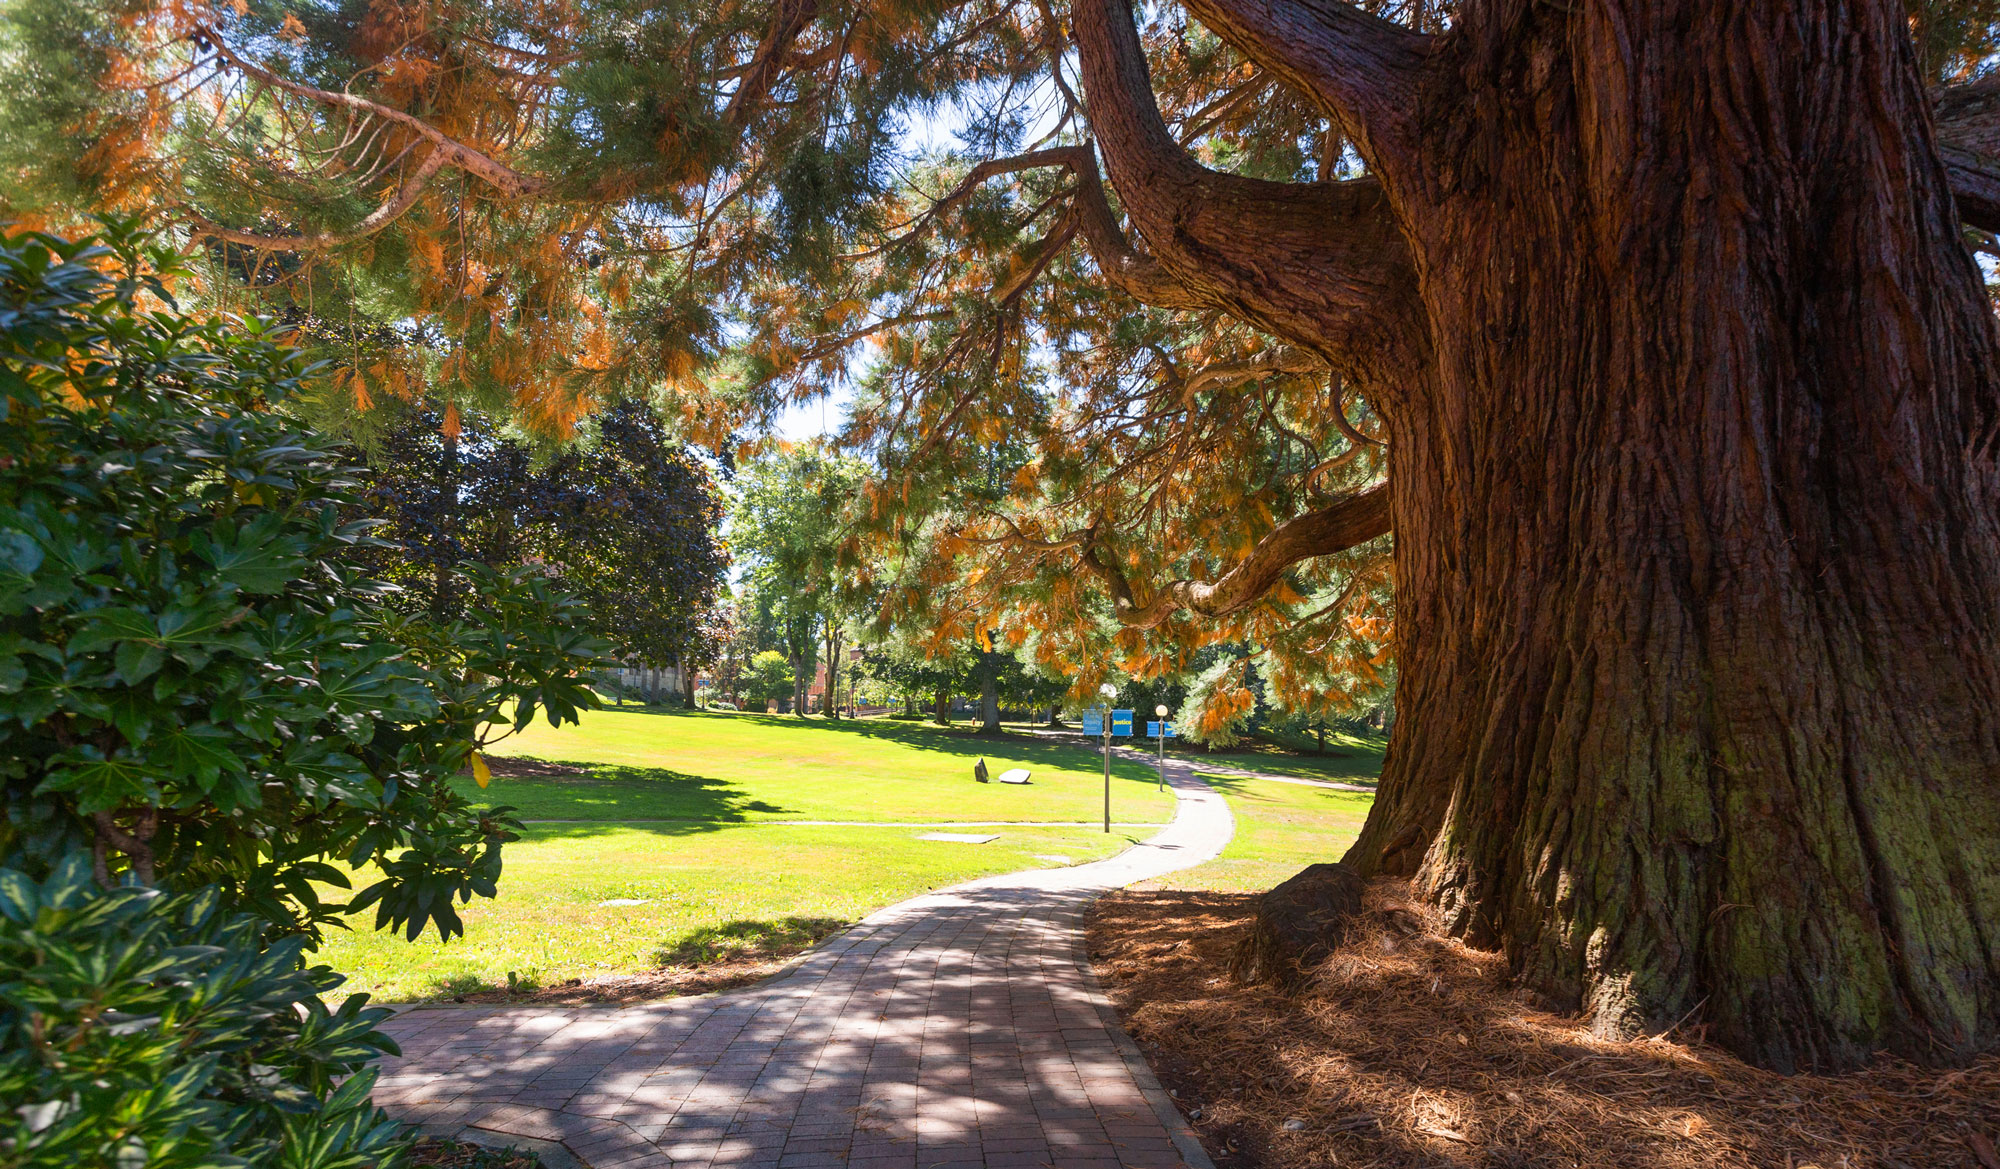 A sunlit brick pathway on campus winds between a large rhododendron bush and a giant sequoia tree. Ahead stretches the bright green lawn of Old Main.